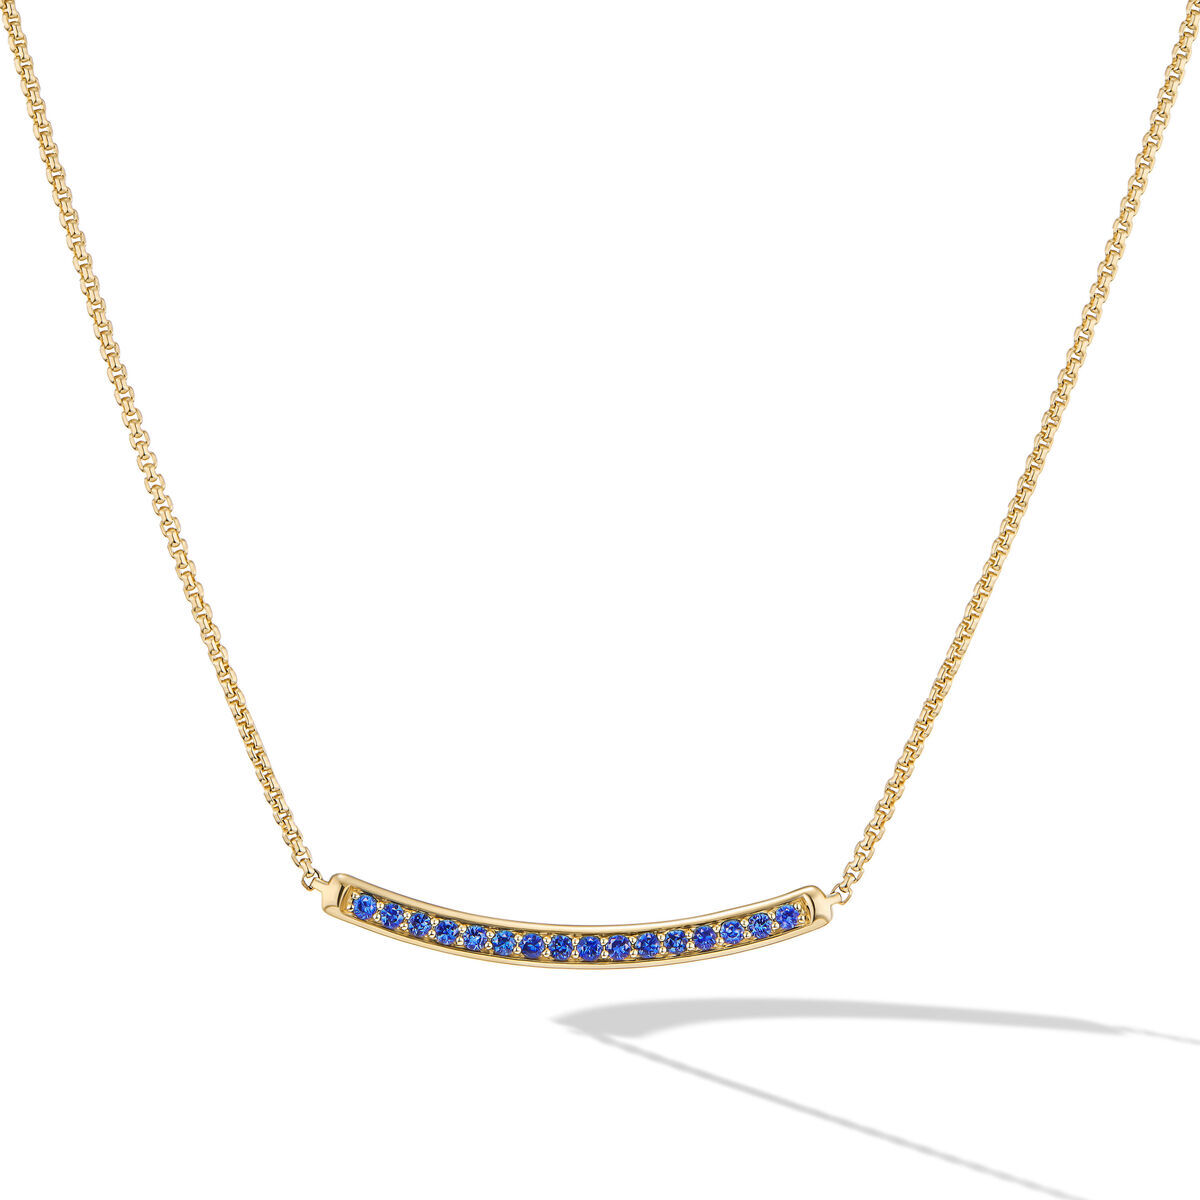 David Yurman Petite Pavé Bar Necklace in 18K Yellow Gold with Blue ...